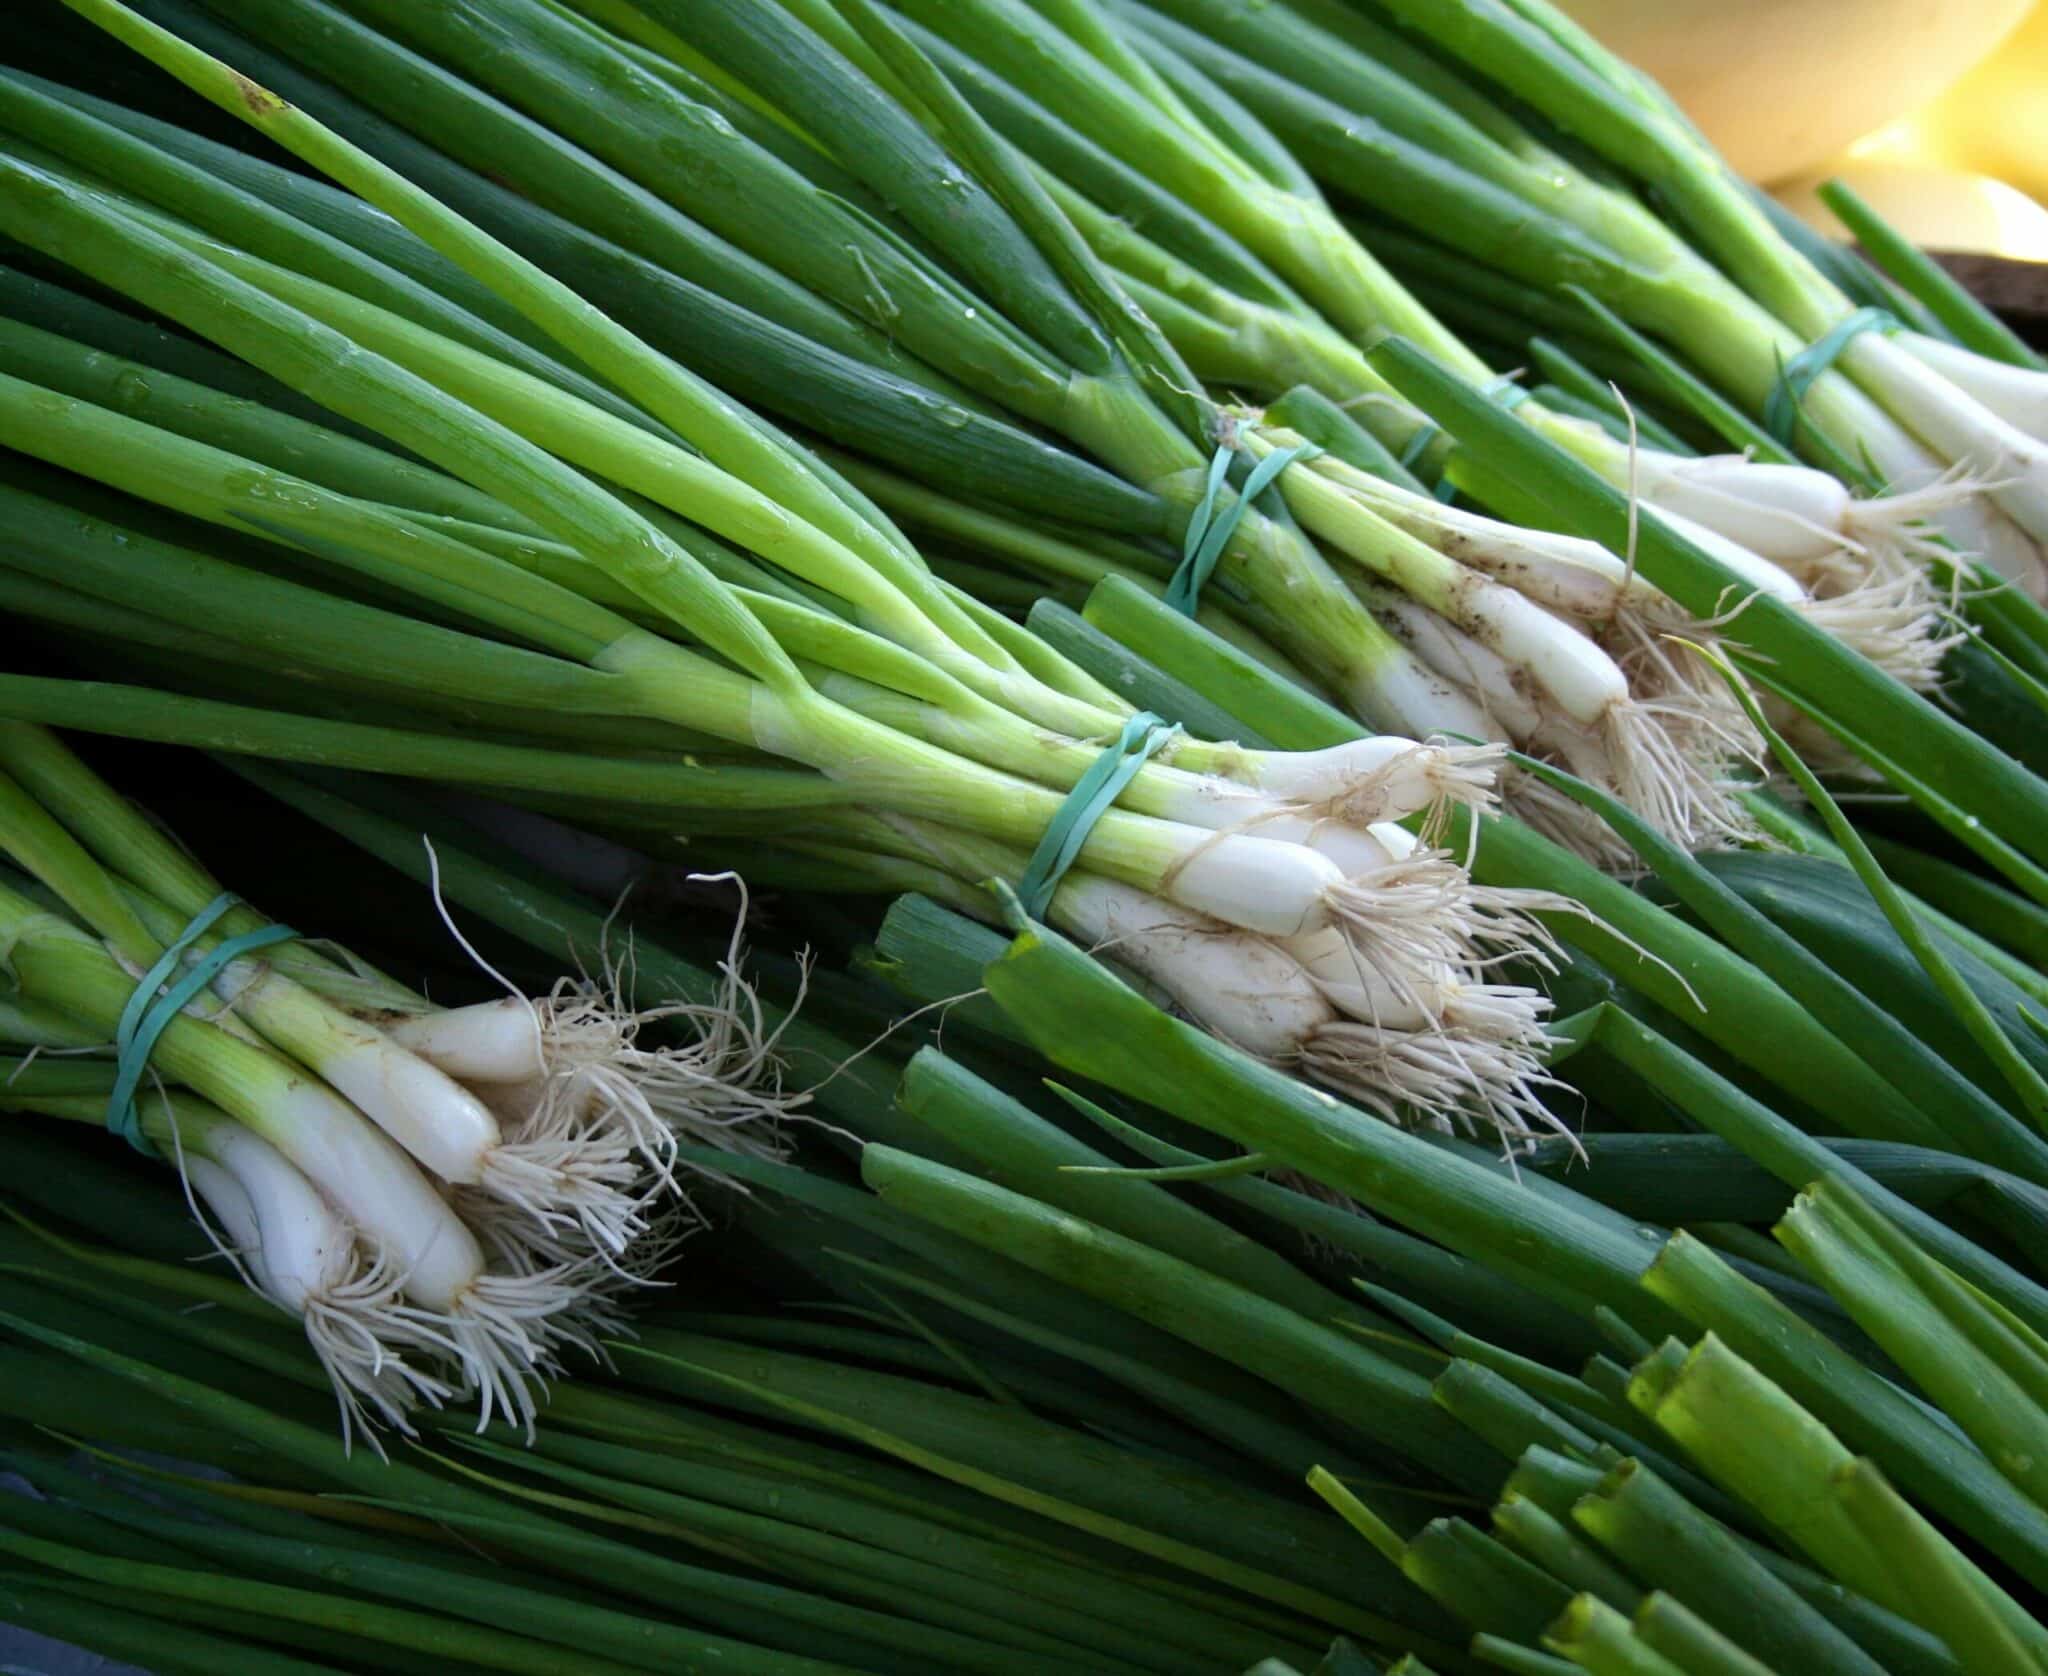 Substitute for Green Onions